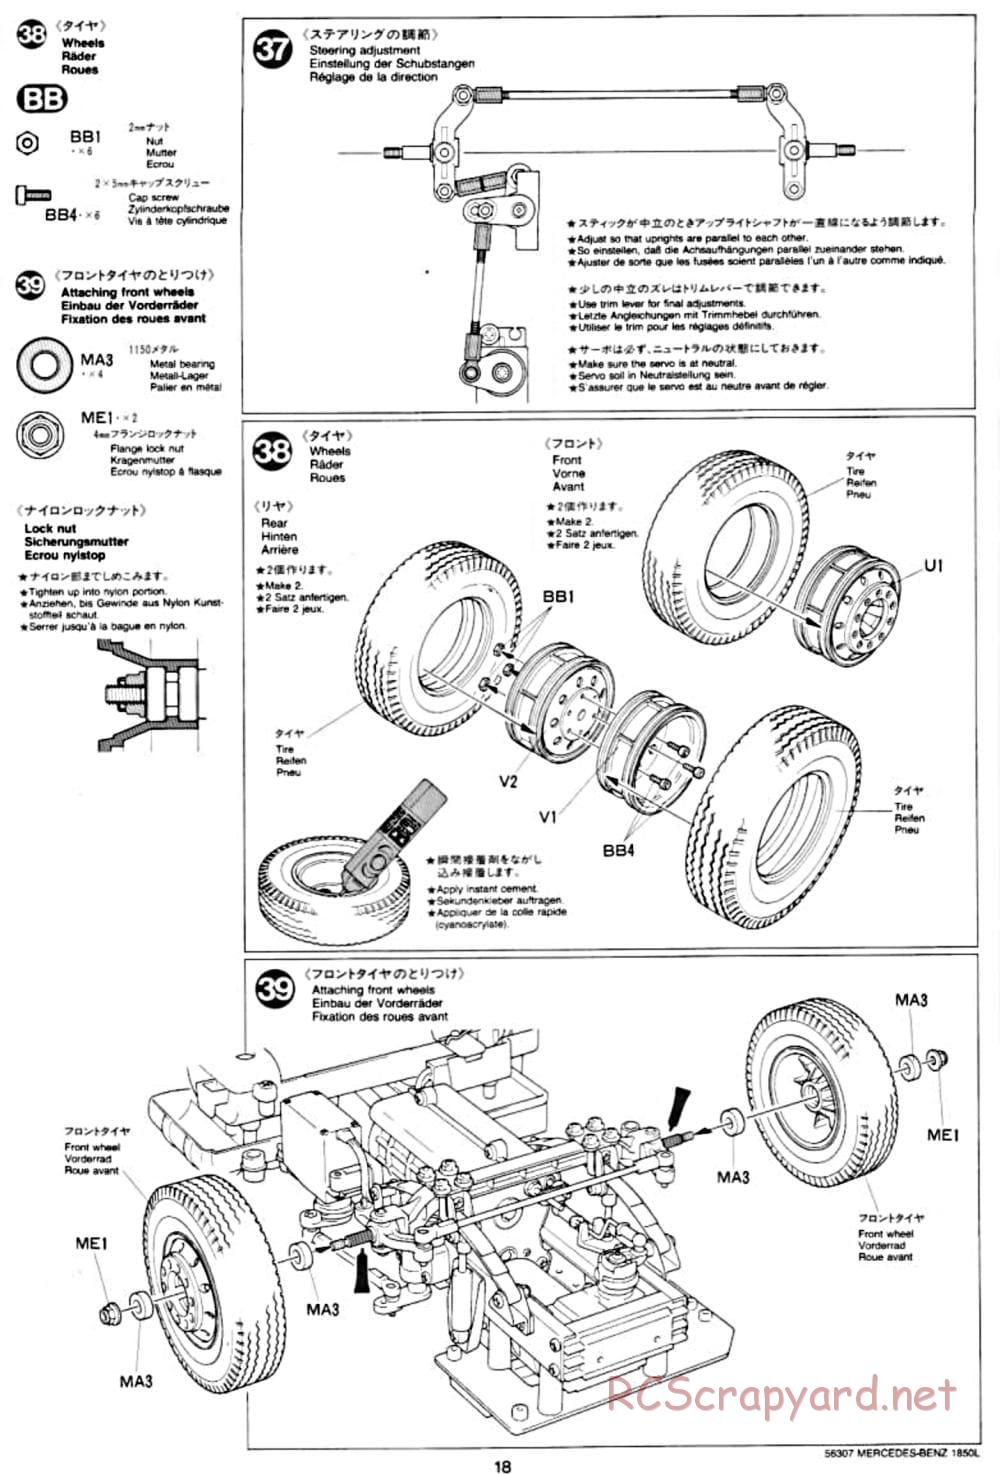 Tamiya - Mercedes-Benz 1850L Delivery Truck - Manual - Page 18